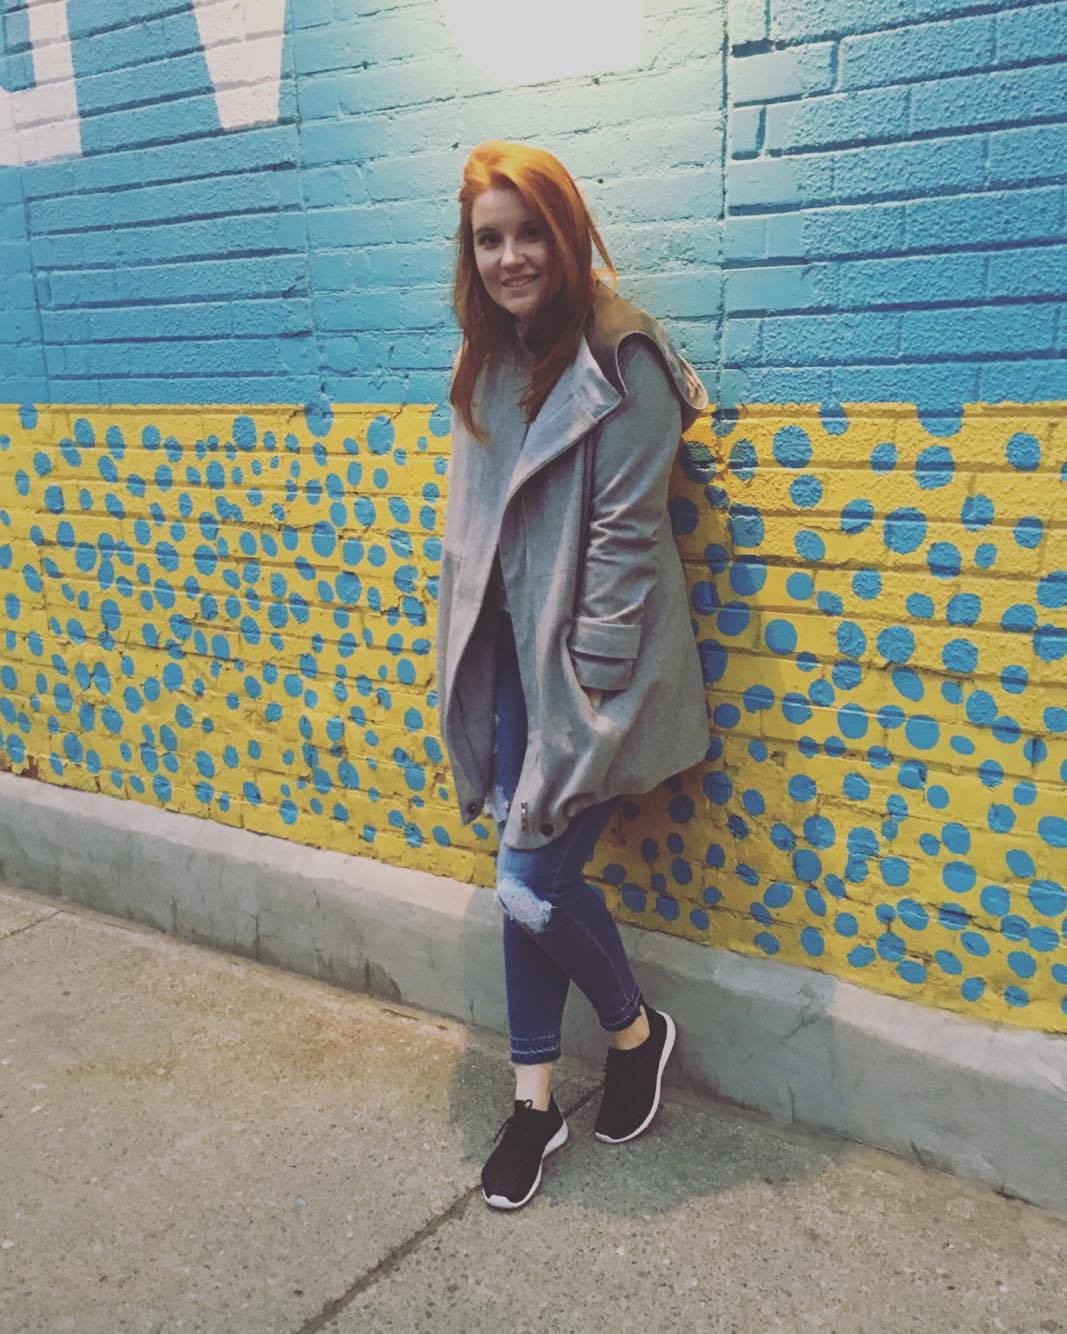 Madeline posing beside some street art. Graffiti that is blue and yellow polkadots on a brick wall.